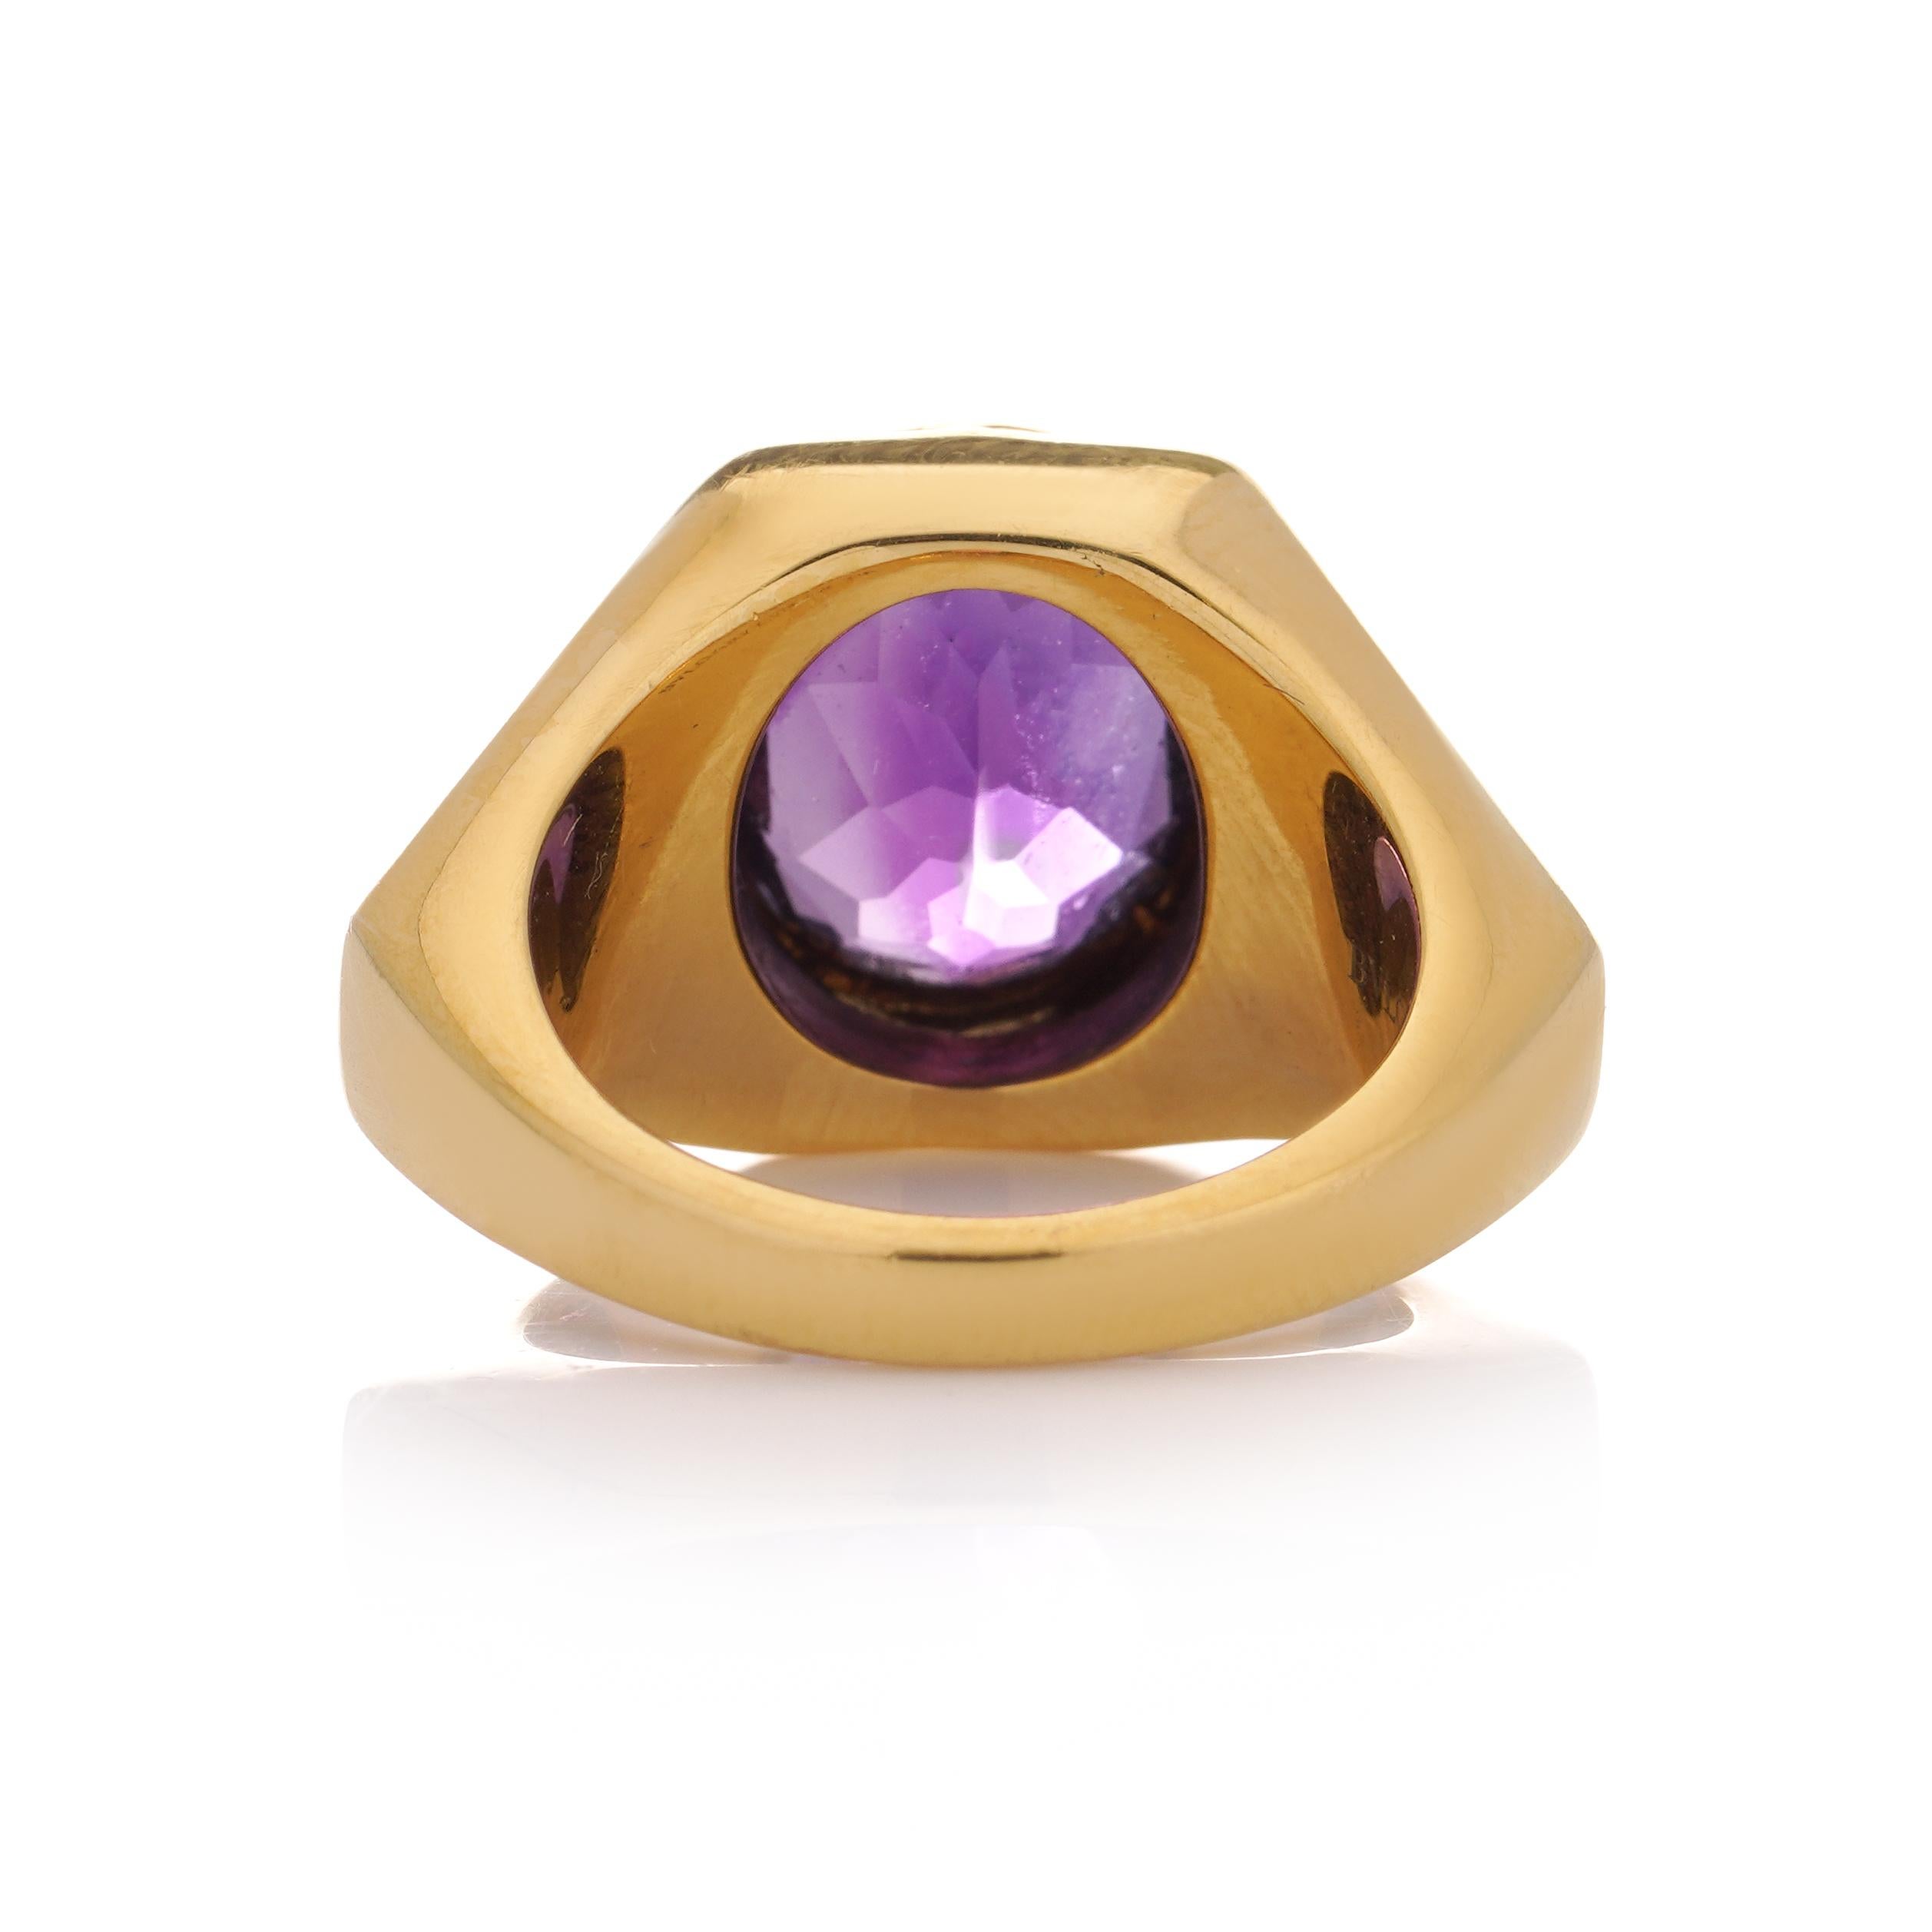 Bvlgari 22kt. yellow gold geometric band ring set with an oval-cut amethyst For Sale 1